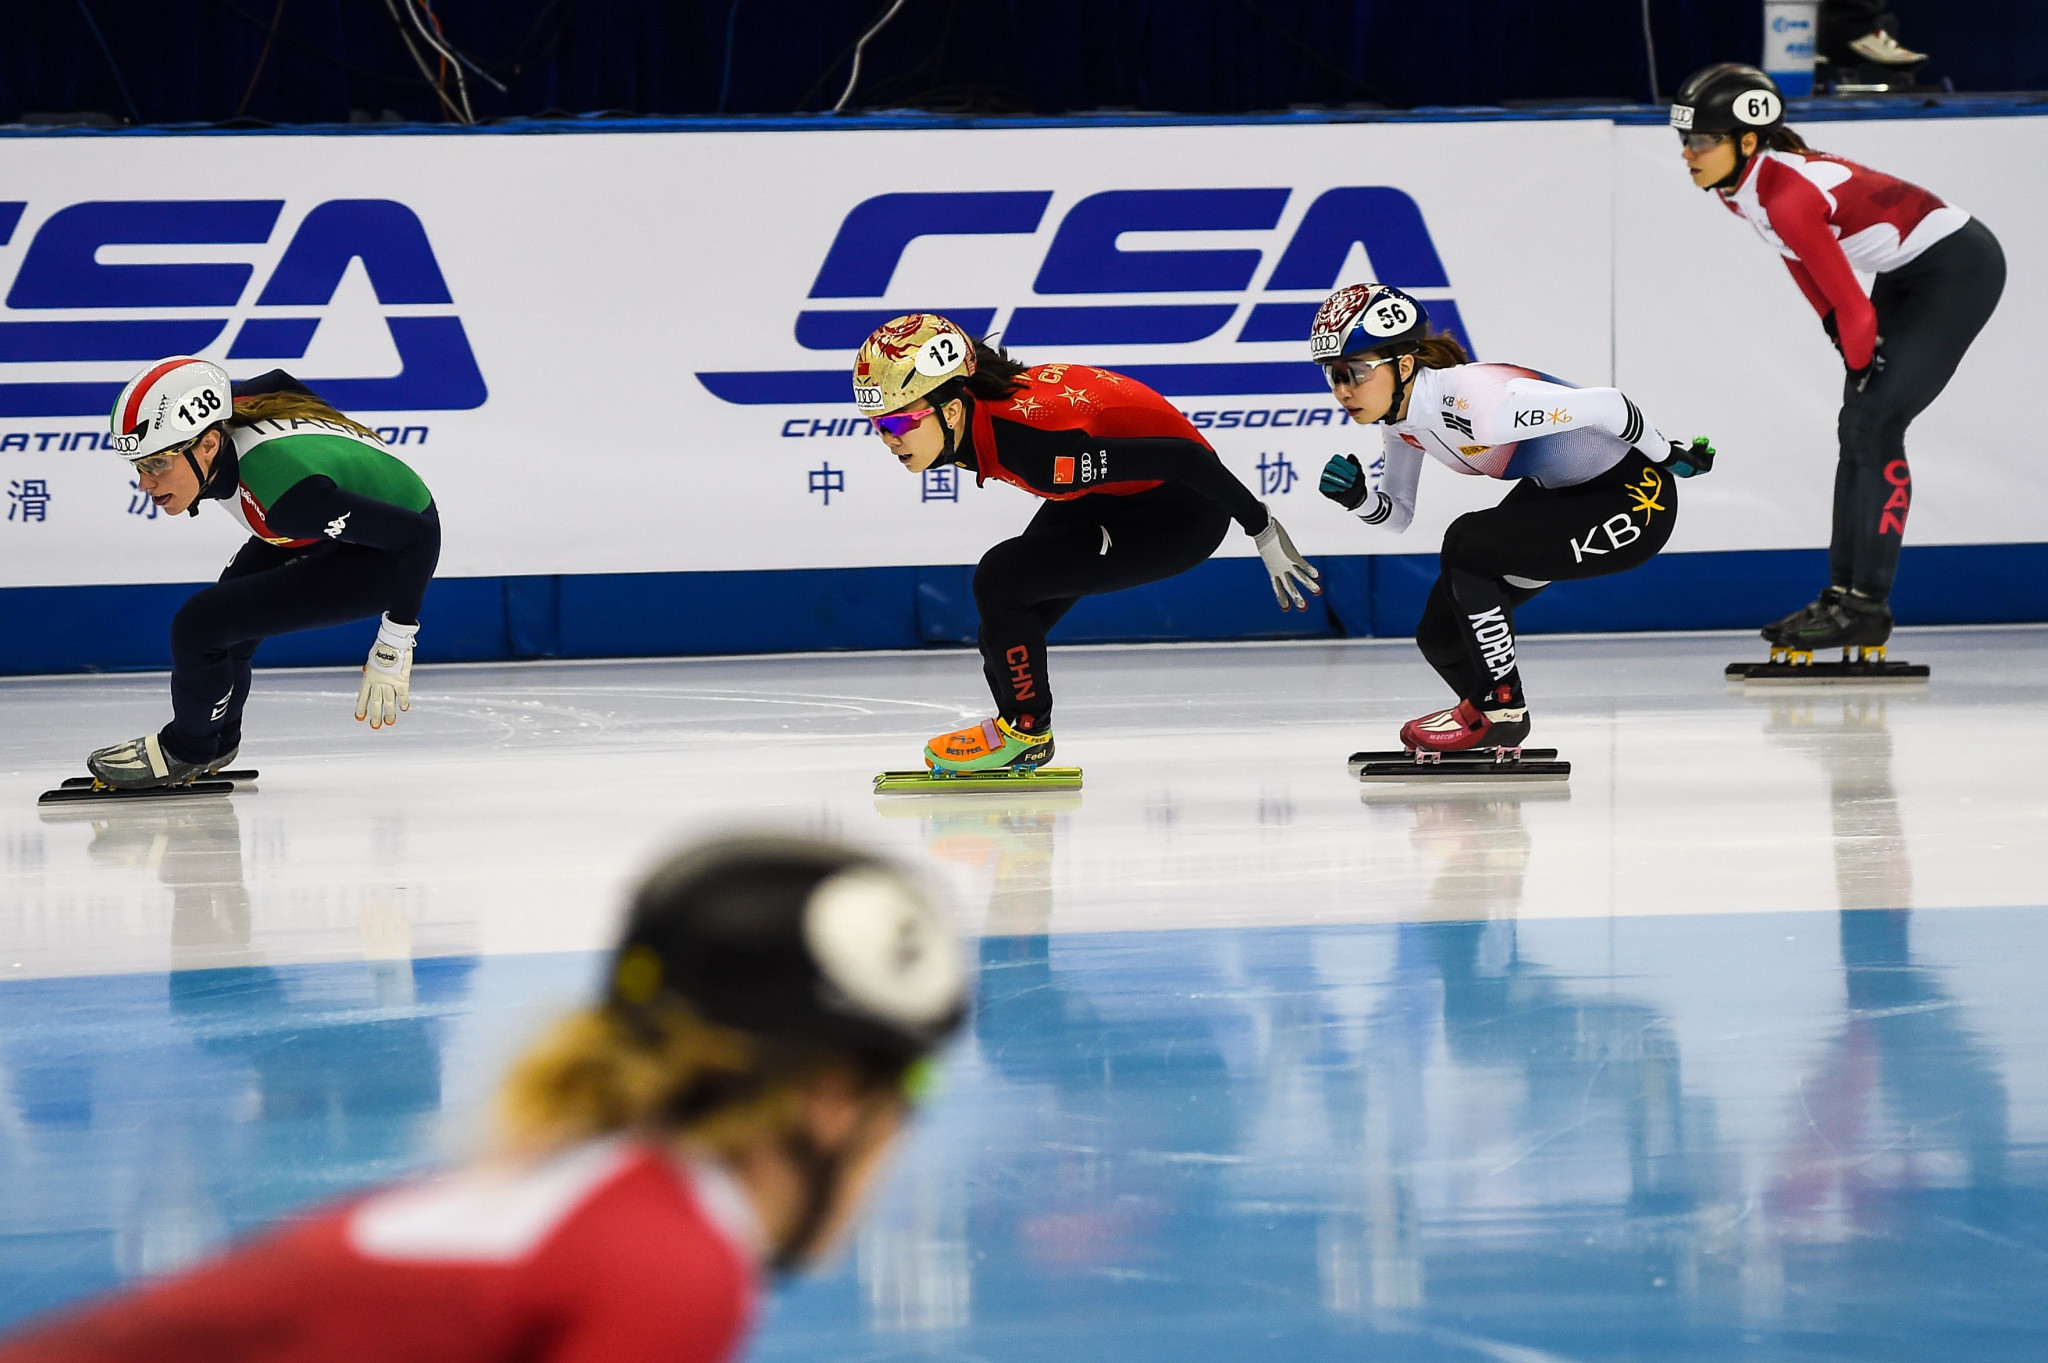 Pyeongchang 2018 qualification and overall International Skating Union Short Track World Cup titles will be up for grabs during the final event of the season in Seoul ©Getty Images